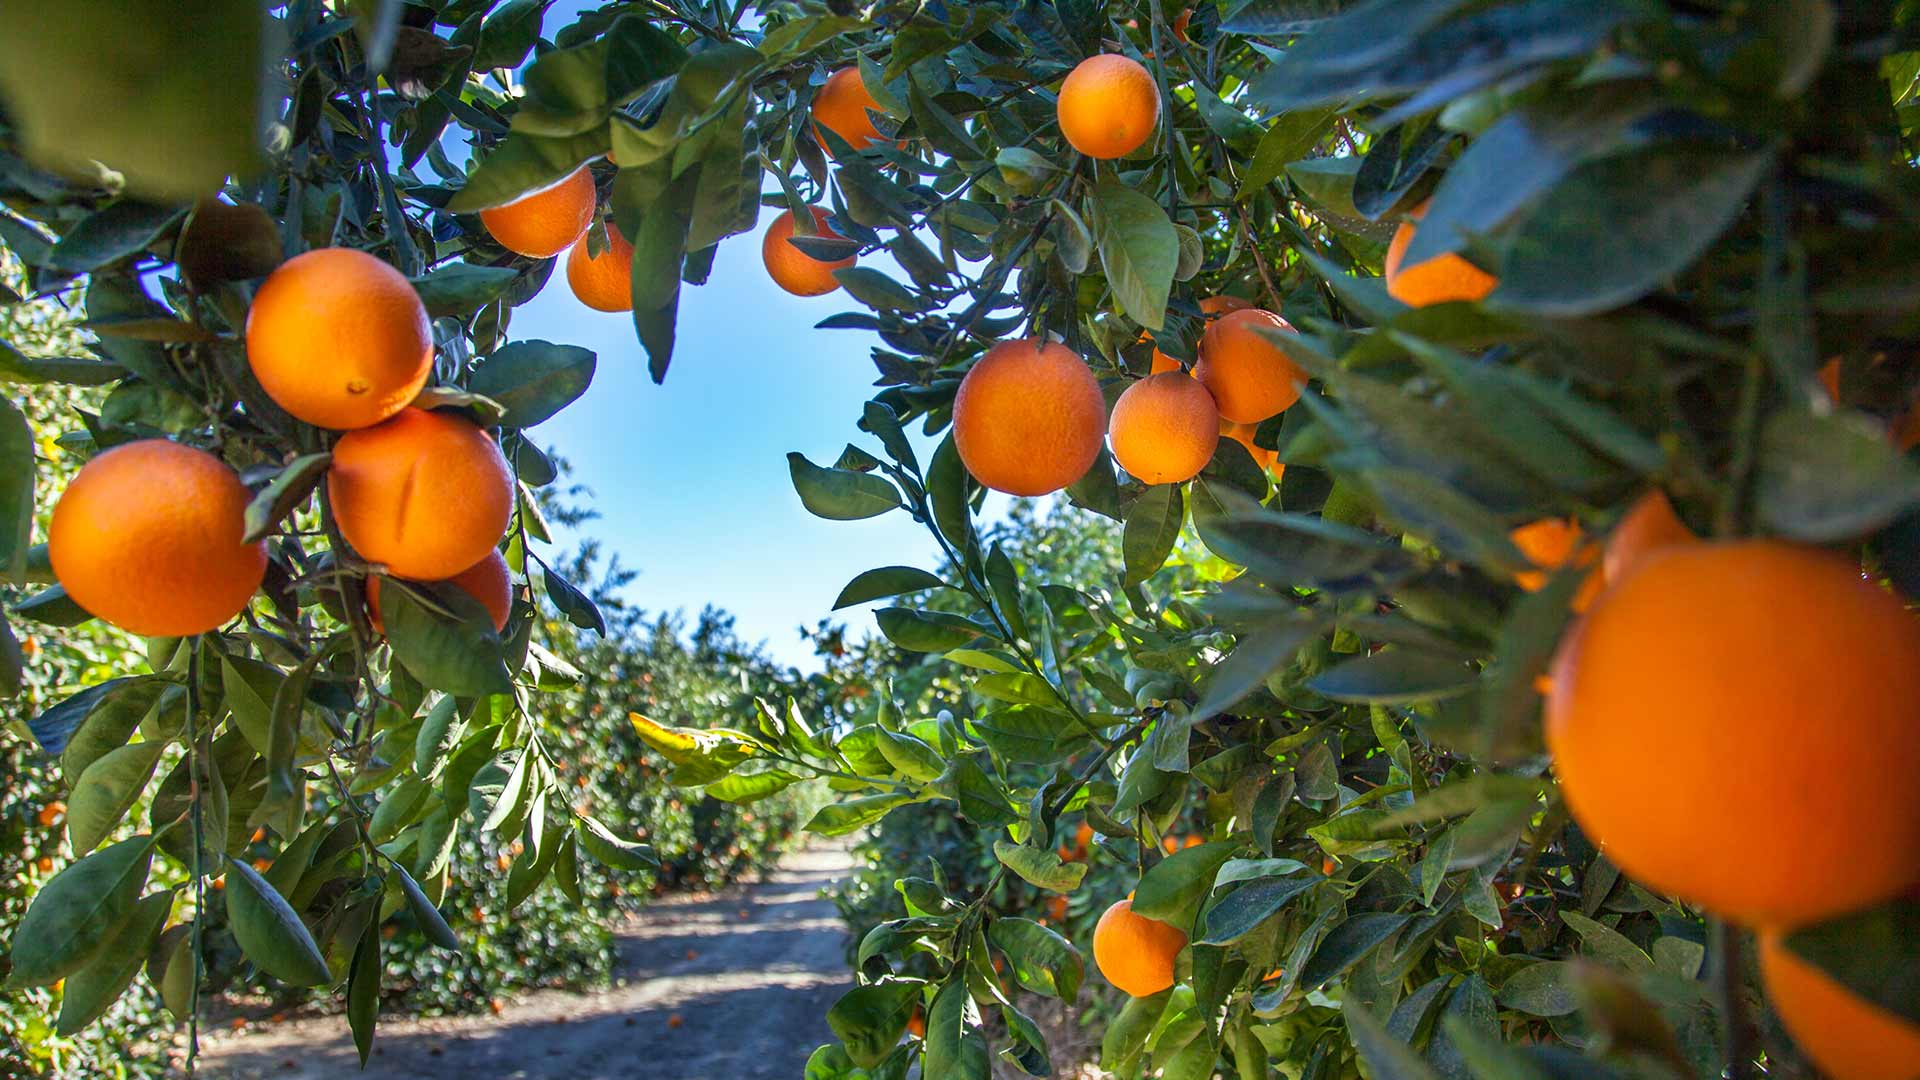 Well irrigated oranges growing on trees in Florida.